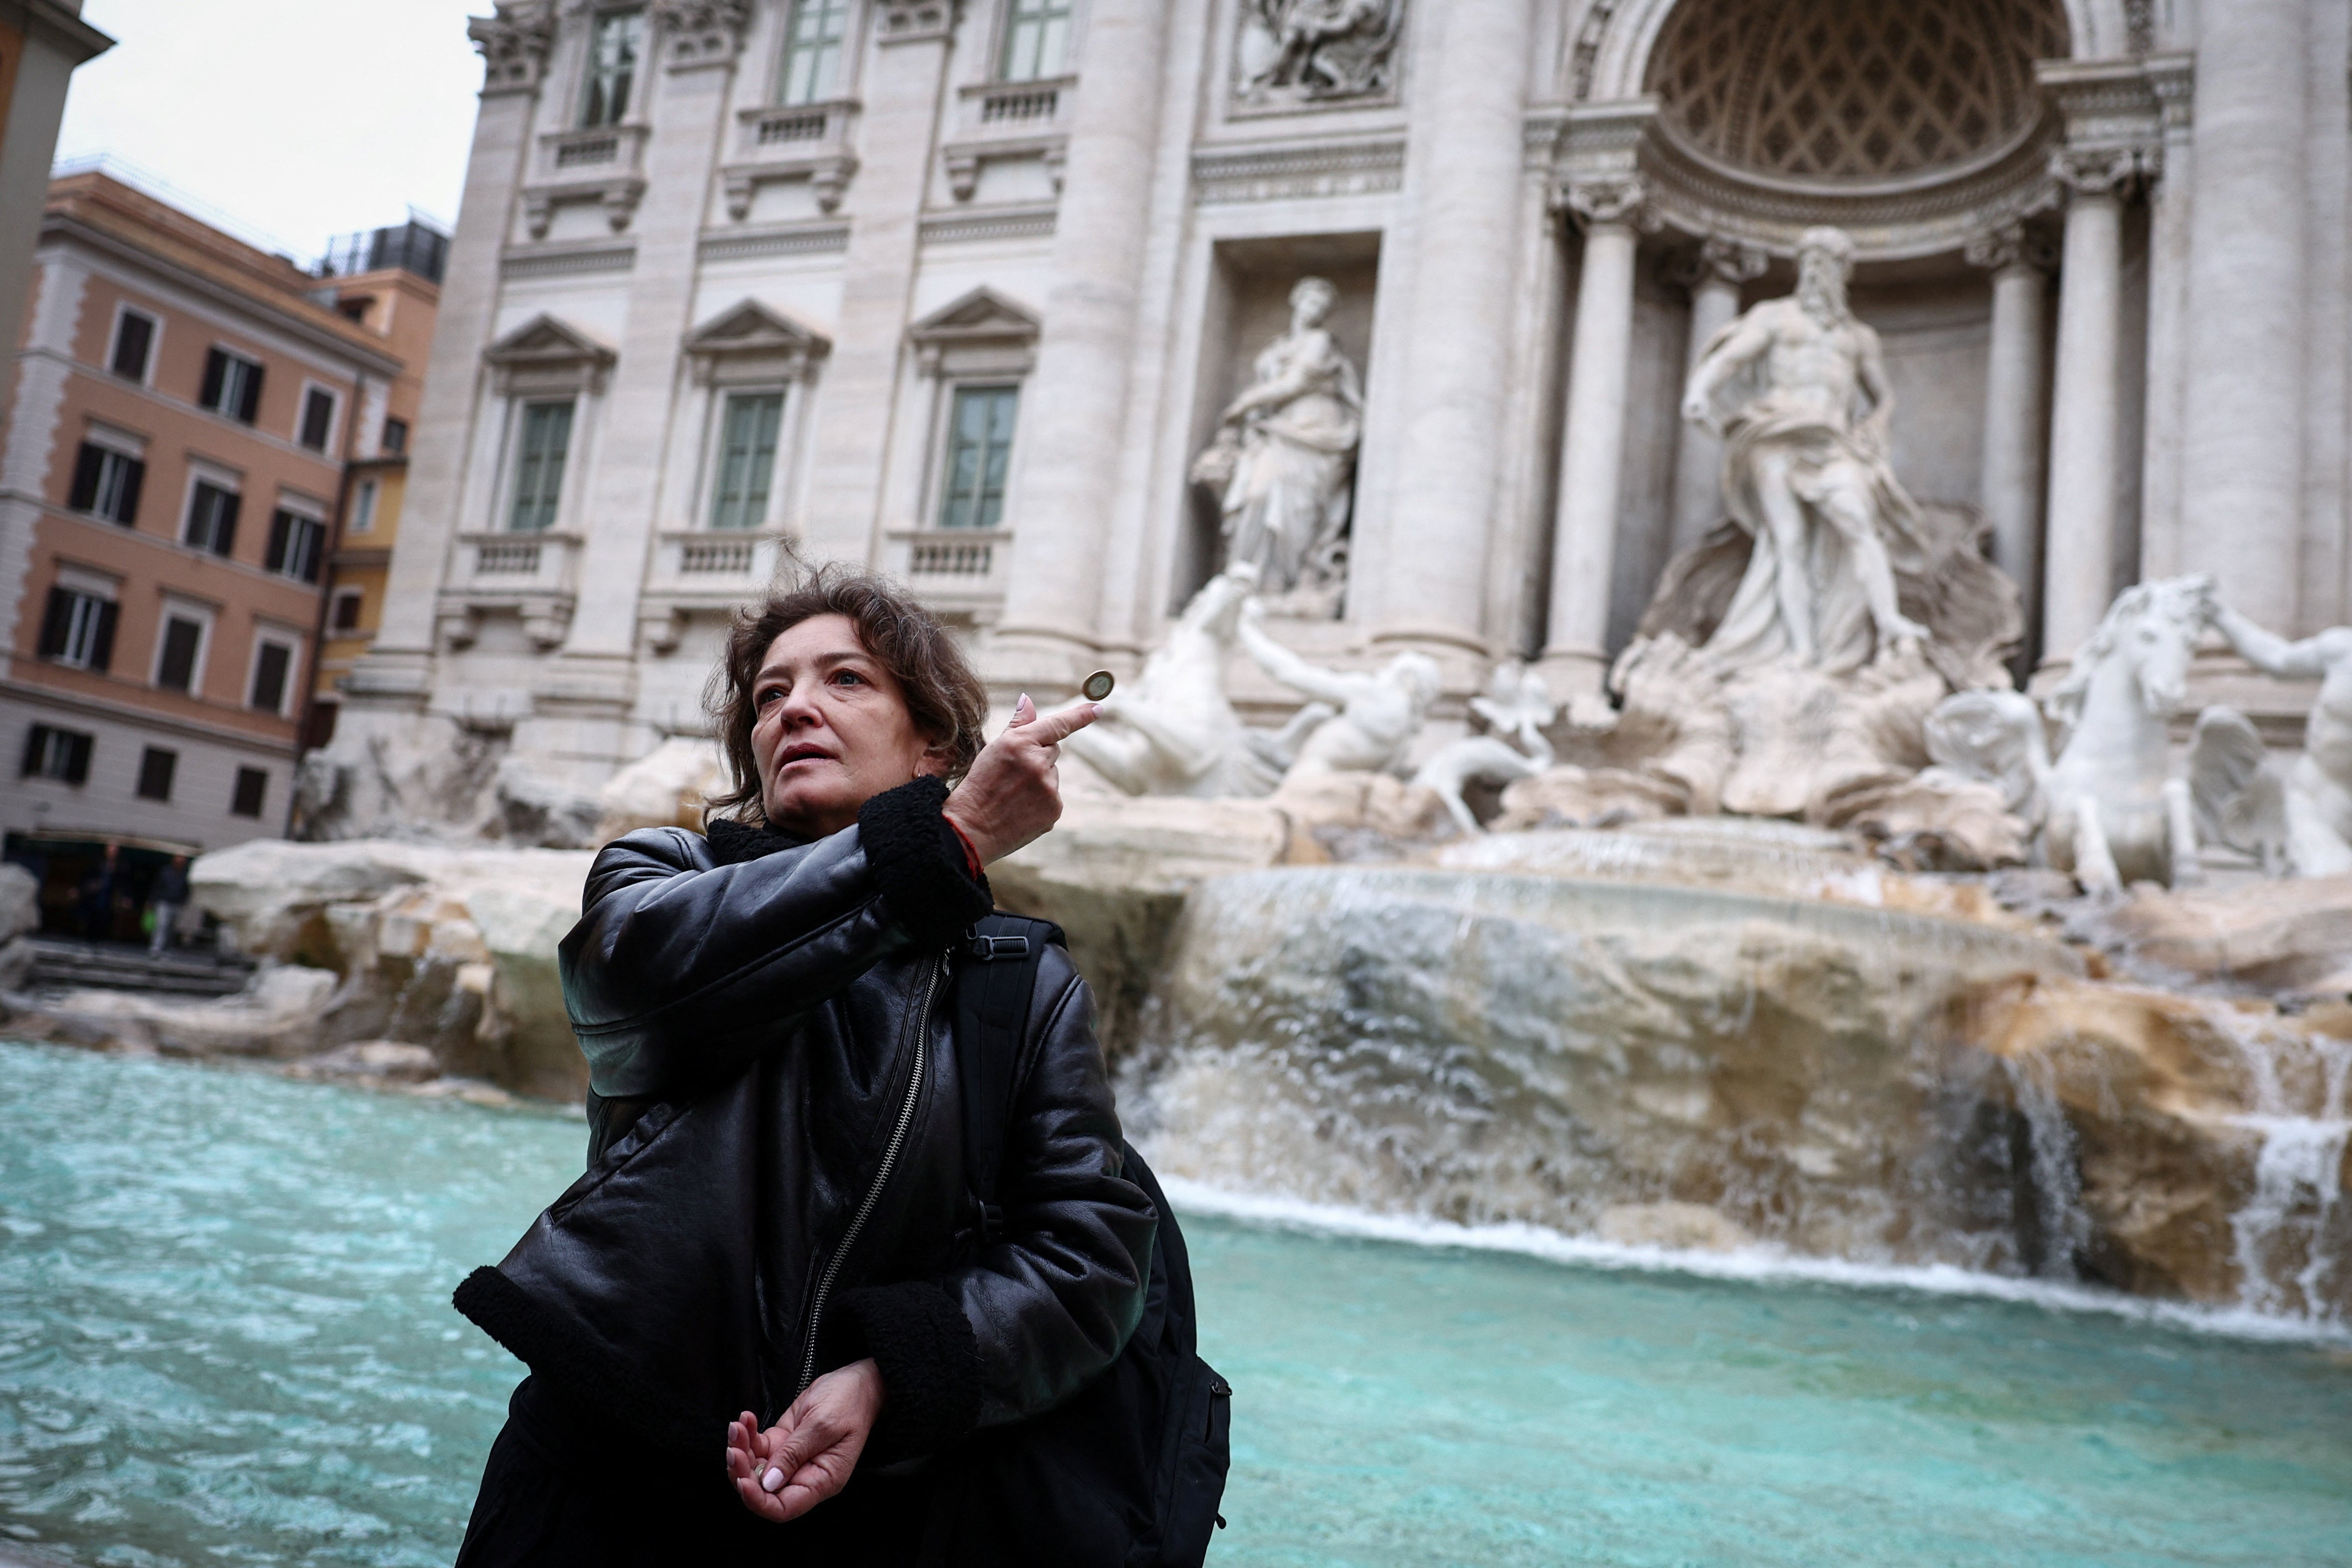 Carola, from Chile, throws a coin into the Trevi Fountain in Rome, Italy